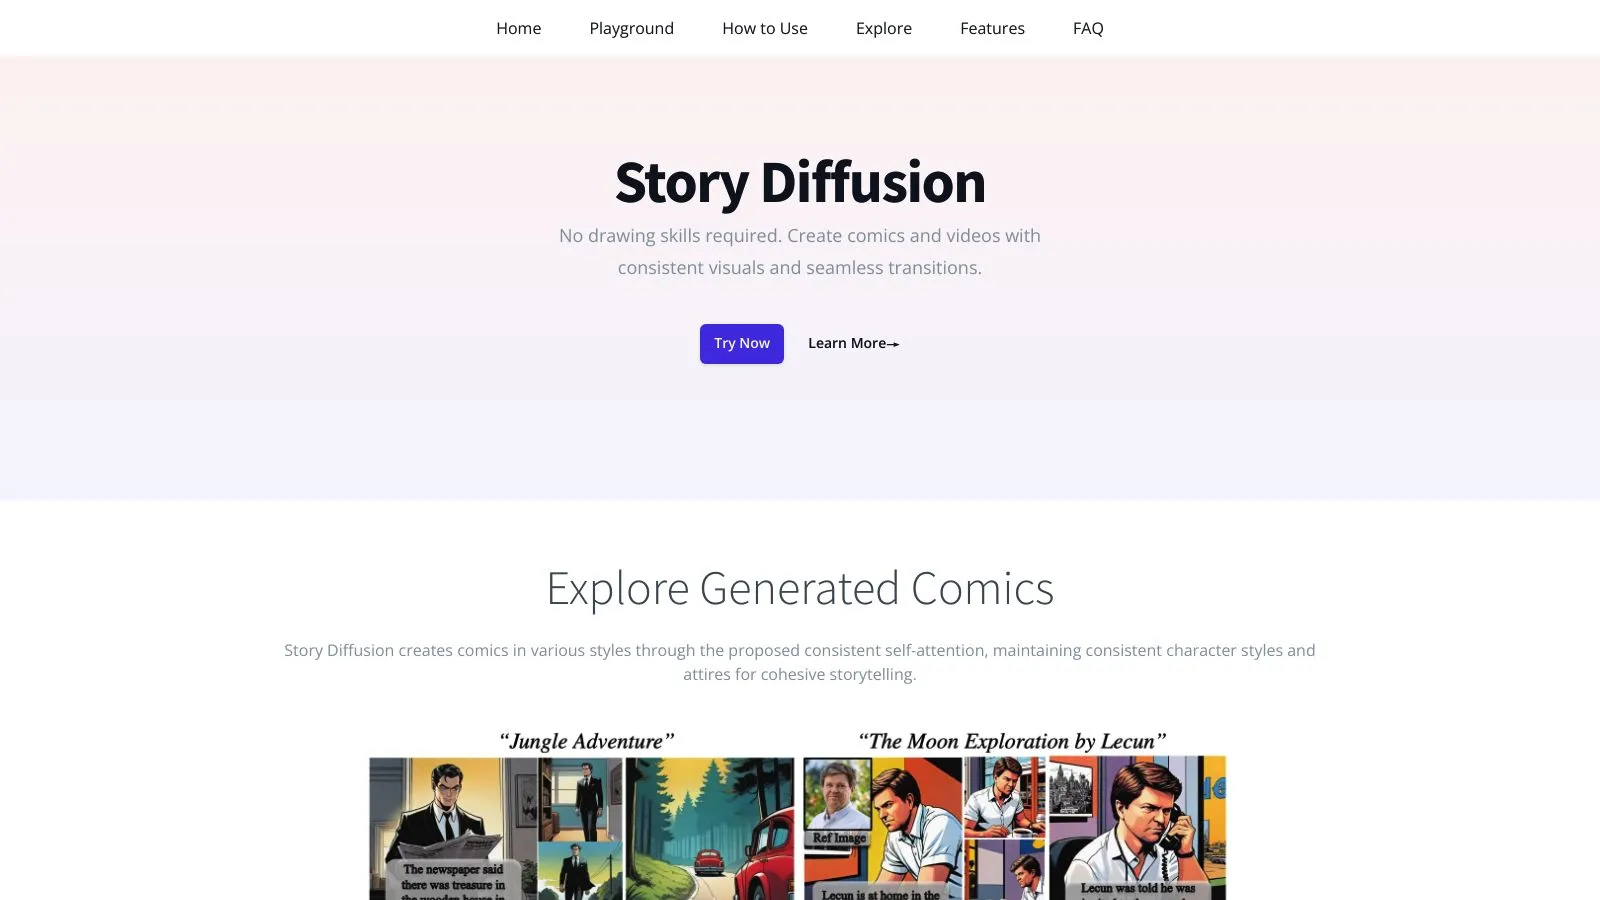 Featured image of Story Diffusion website